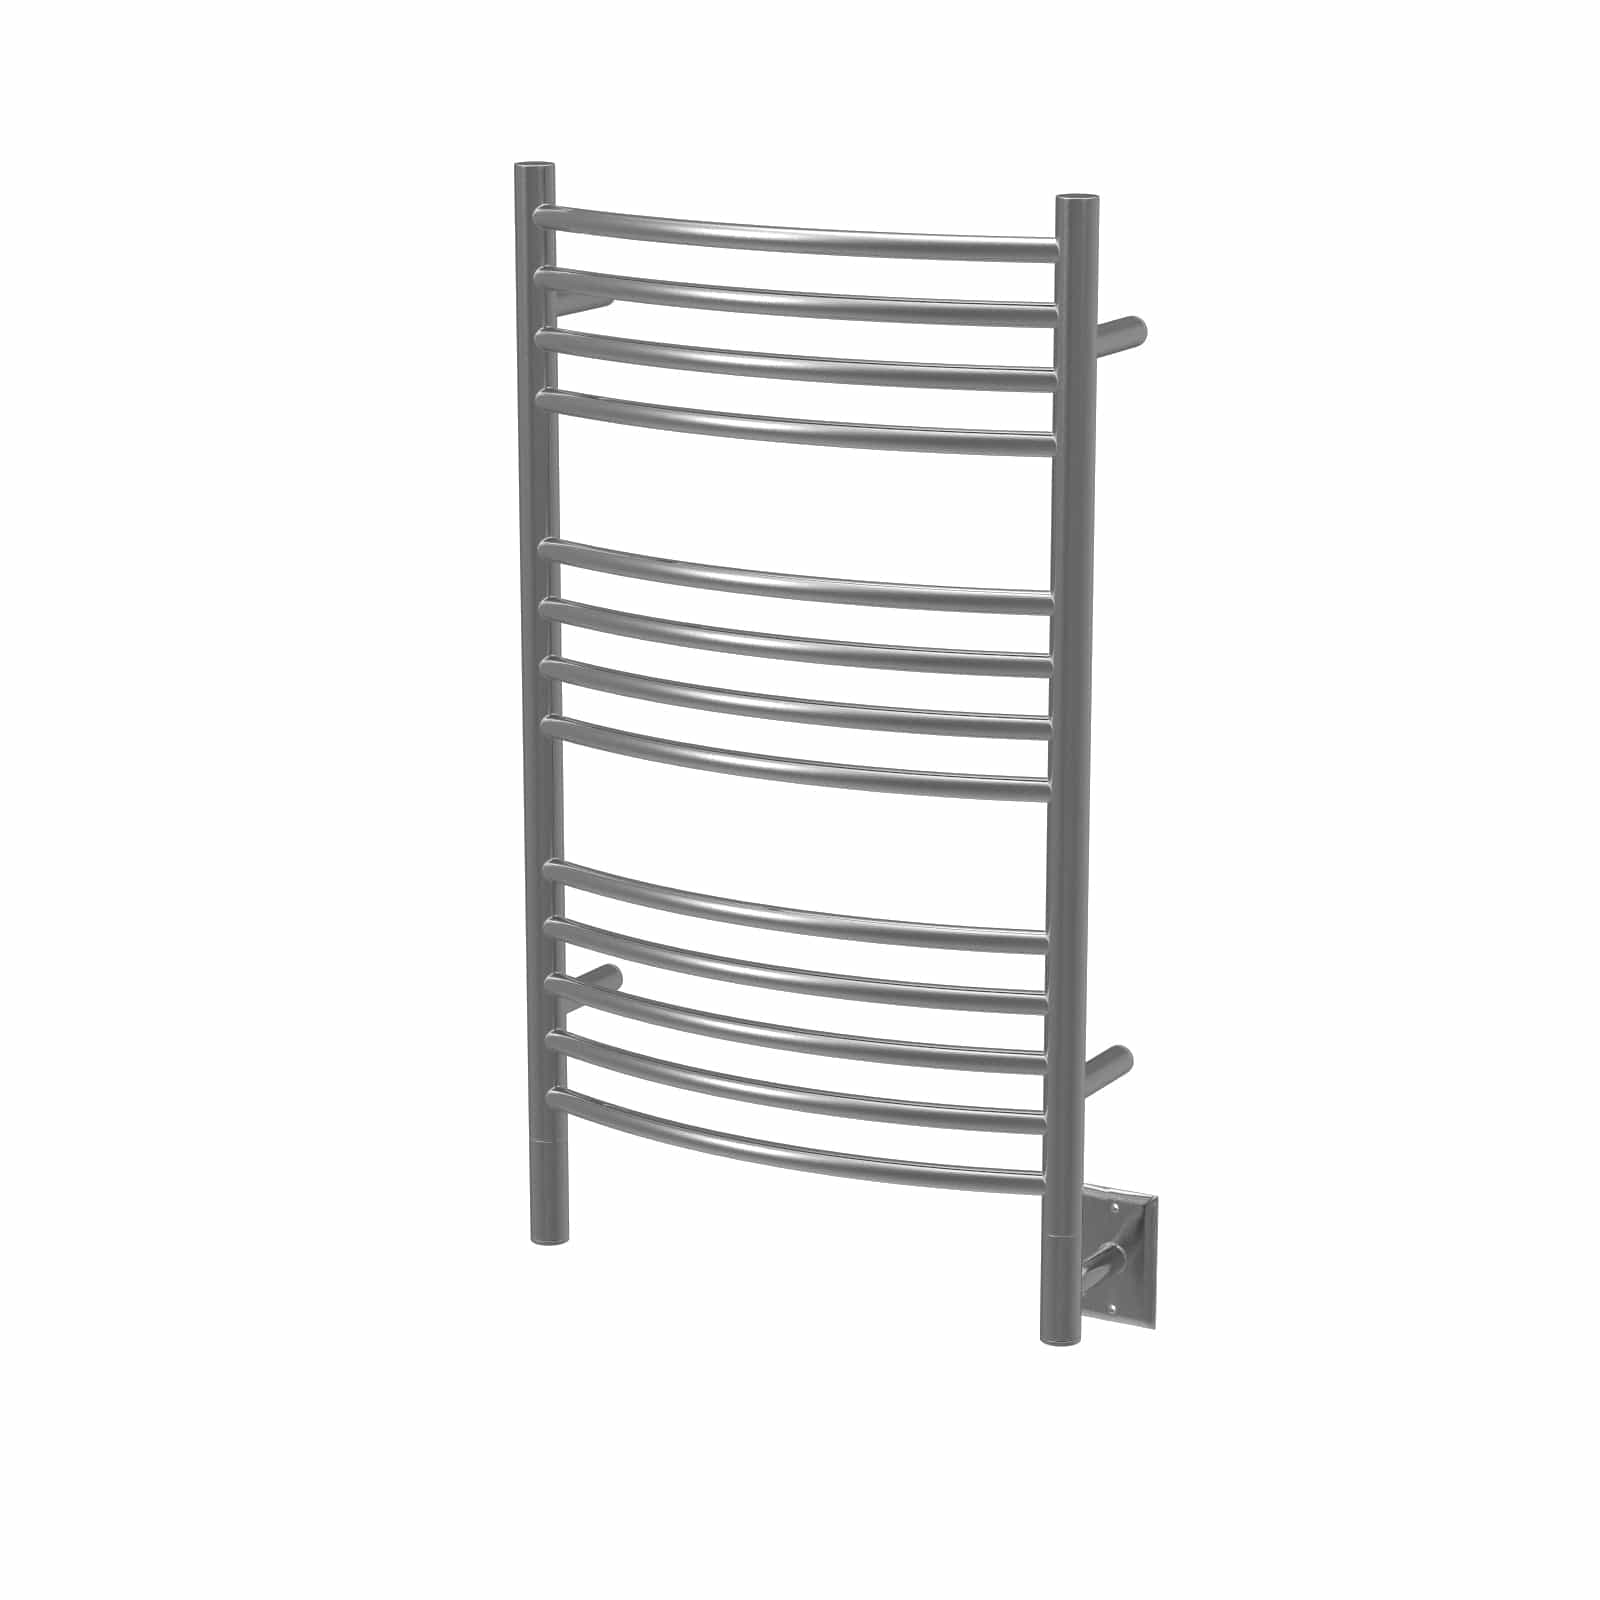 Amba Towel Warmer CCB Brushed Stainless Amba Heated Towel Rack Model C Jeeves Curved